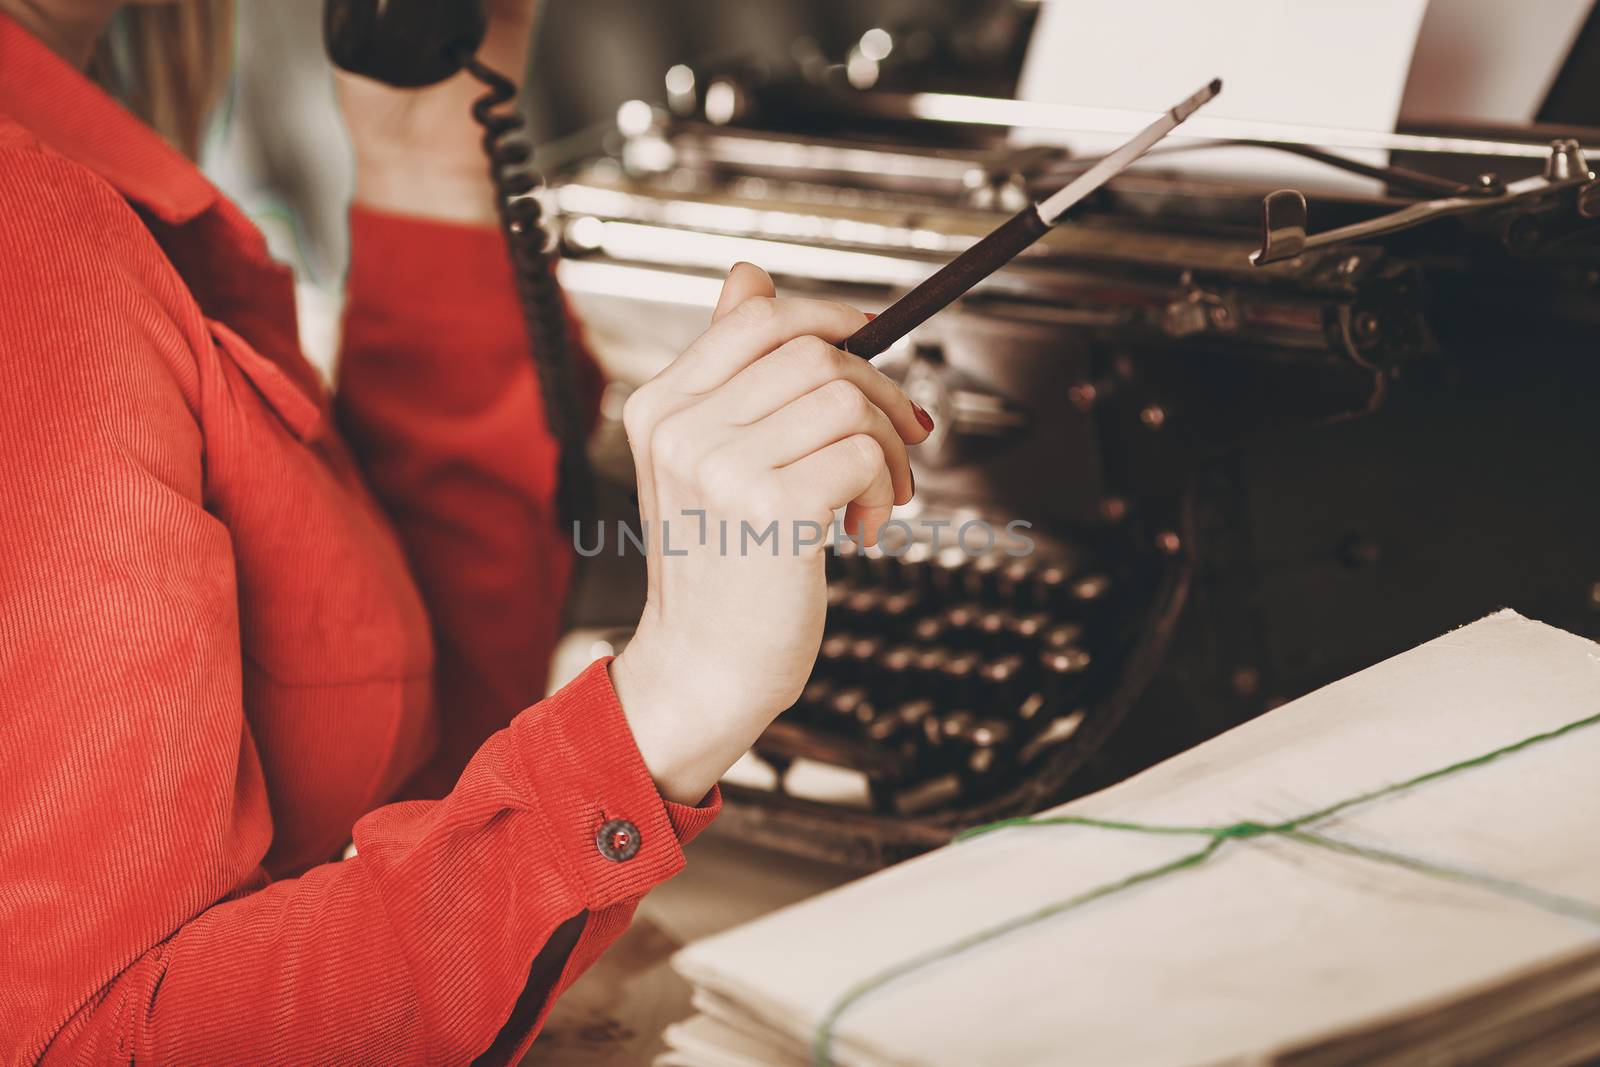 Secretary at old typewriter with telephone. Young woman using typewriter. Business concepts. Retro picture style.